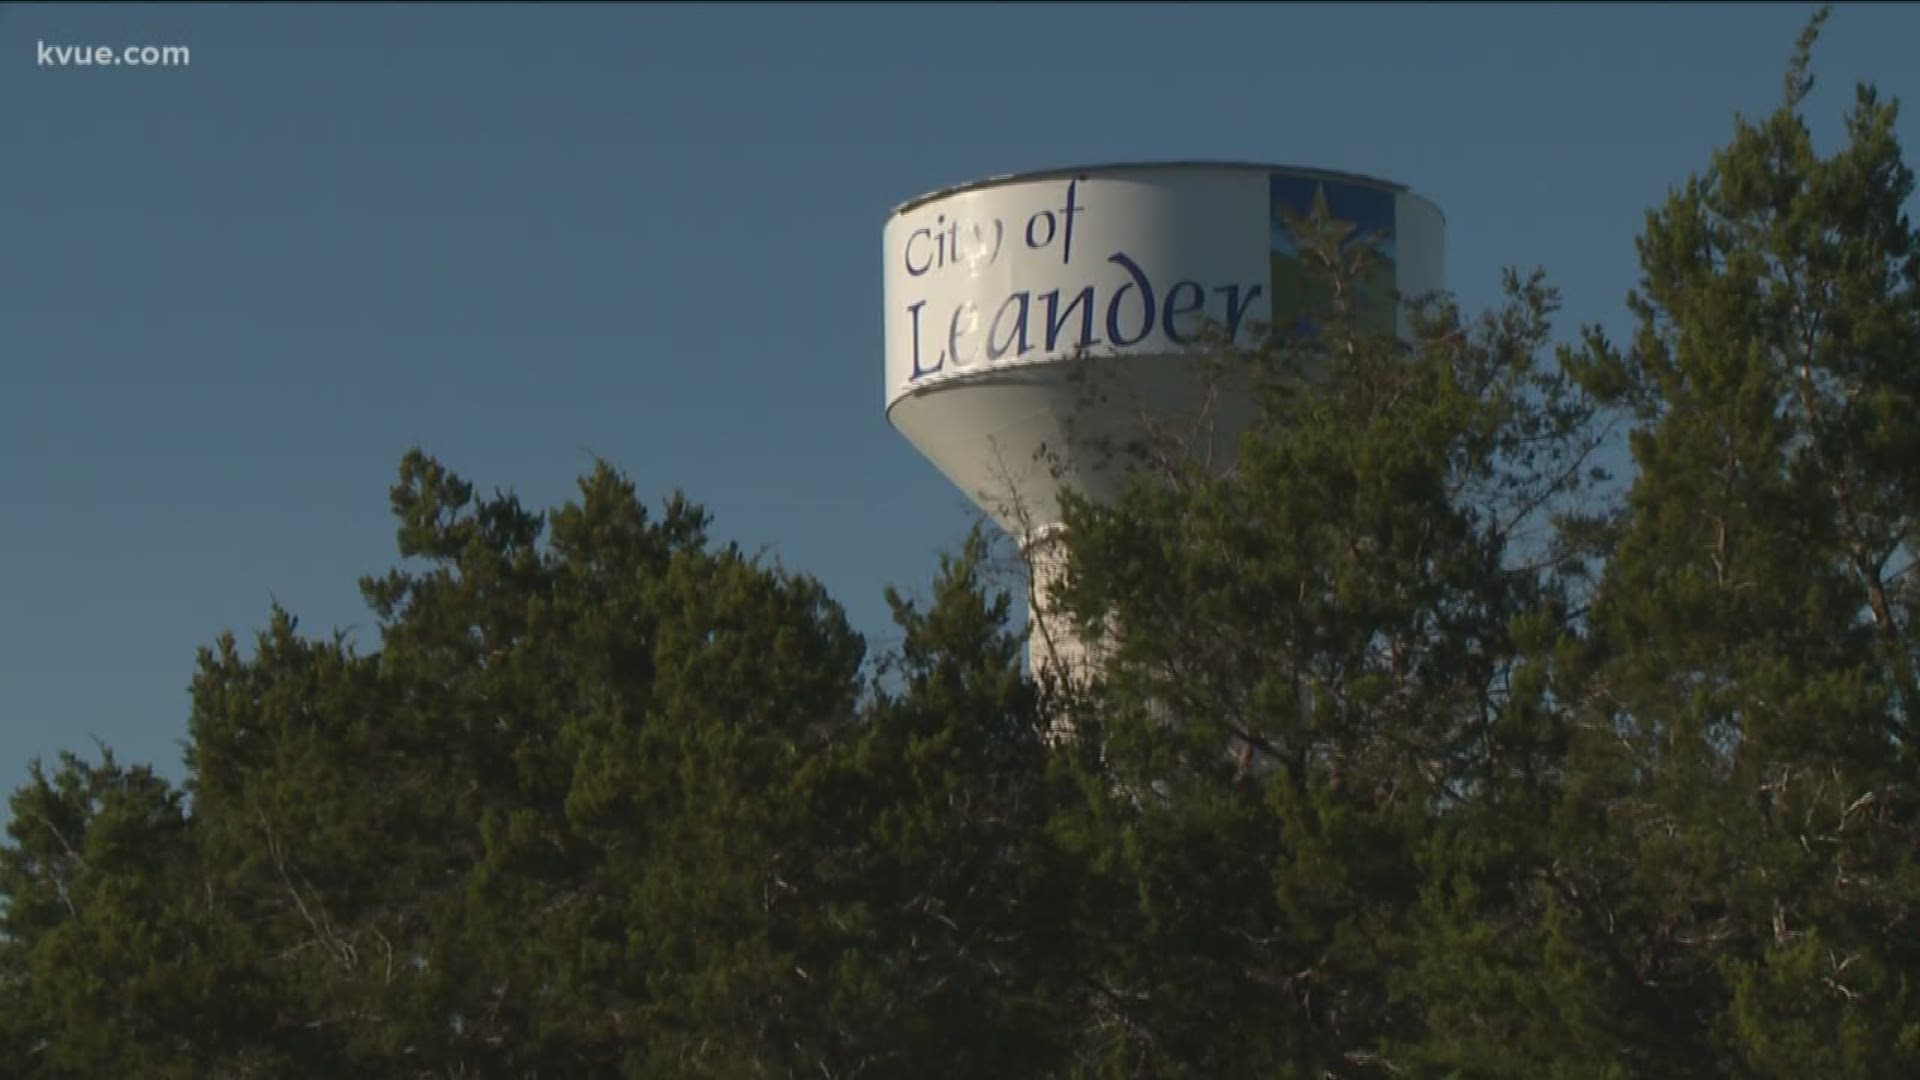 KVUE is continuing our Boomtown series by taking a look at the growth in the areas that surround Austin. KVUE's Christy Millweard gives us a look at the impact in Leander.